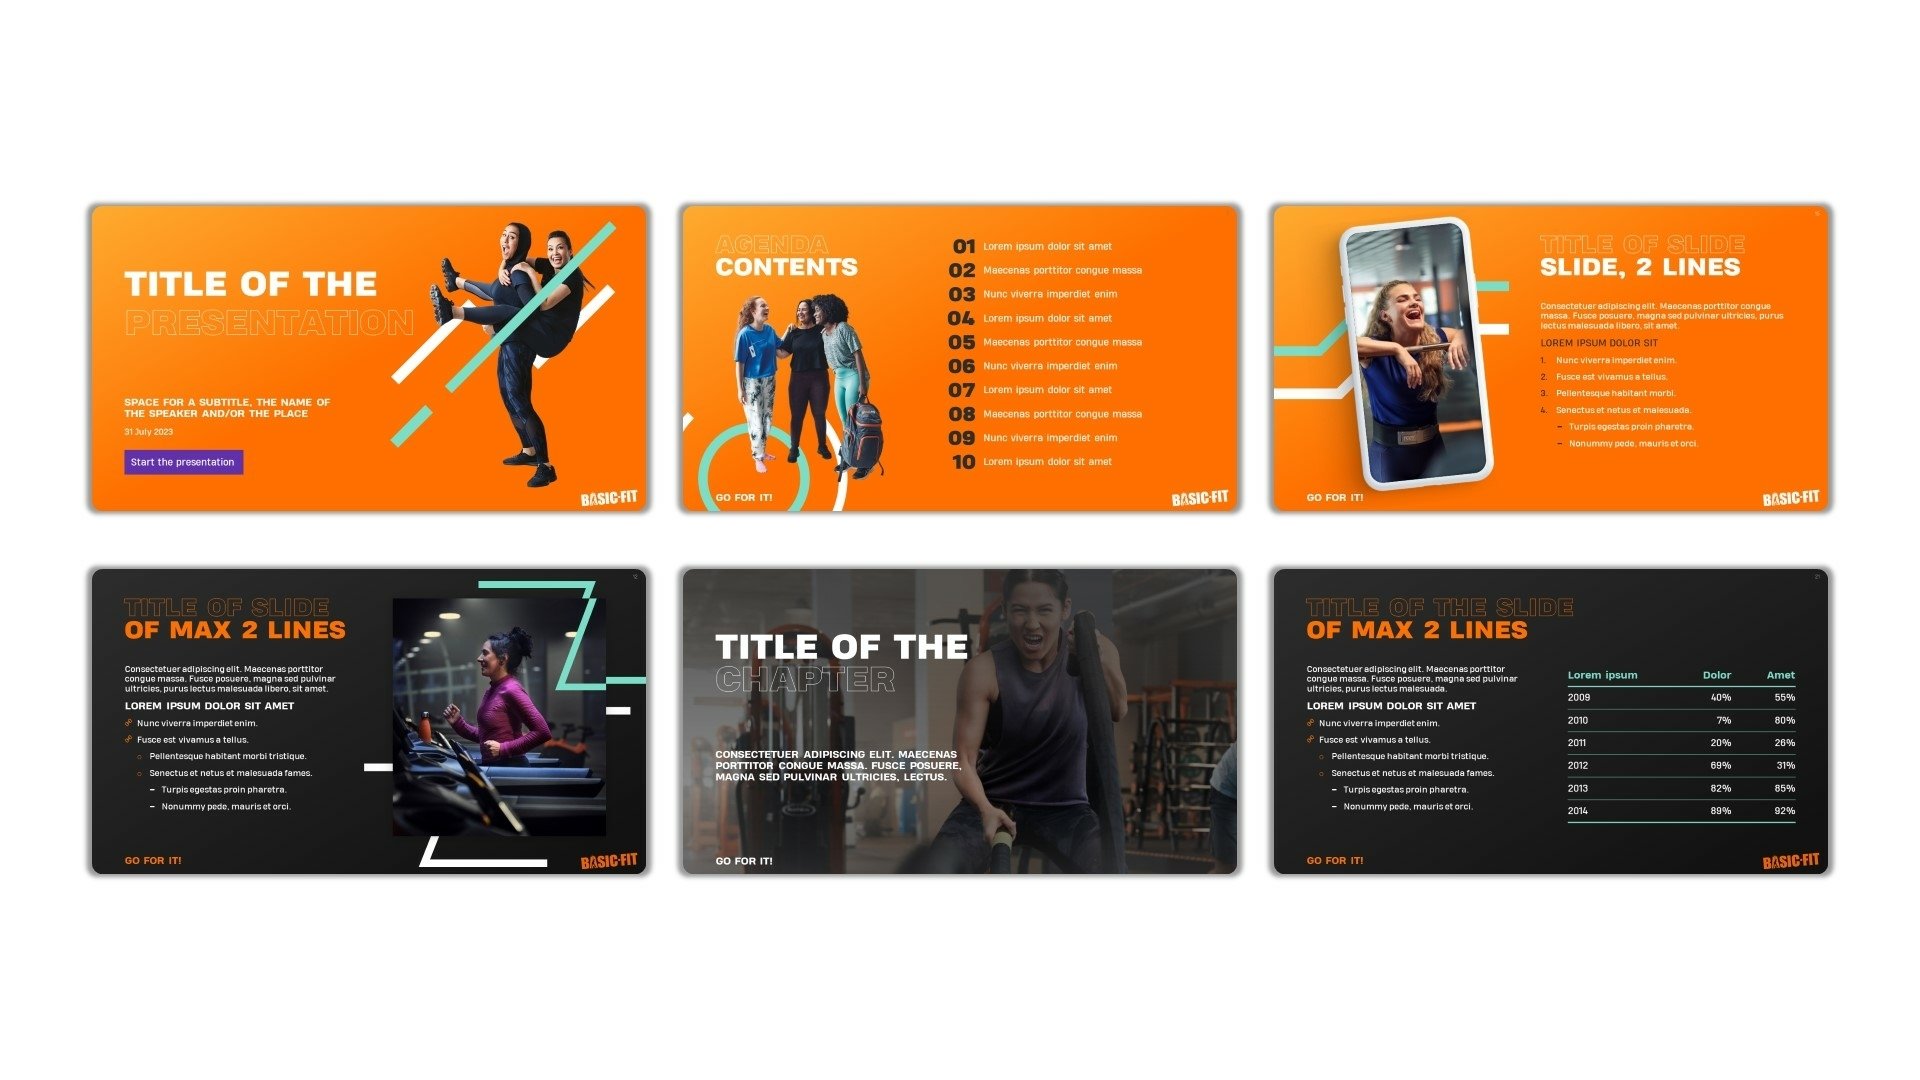 PowerPoint template voor Basic-Fit